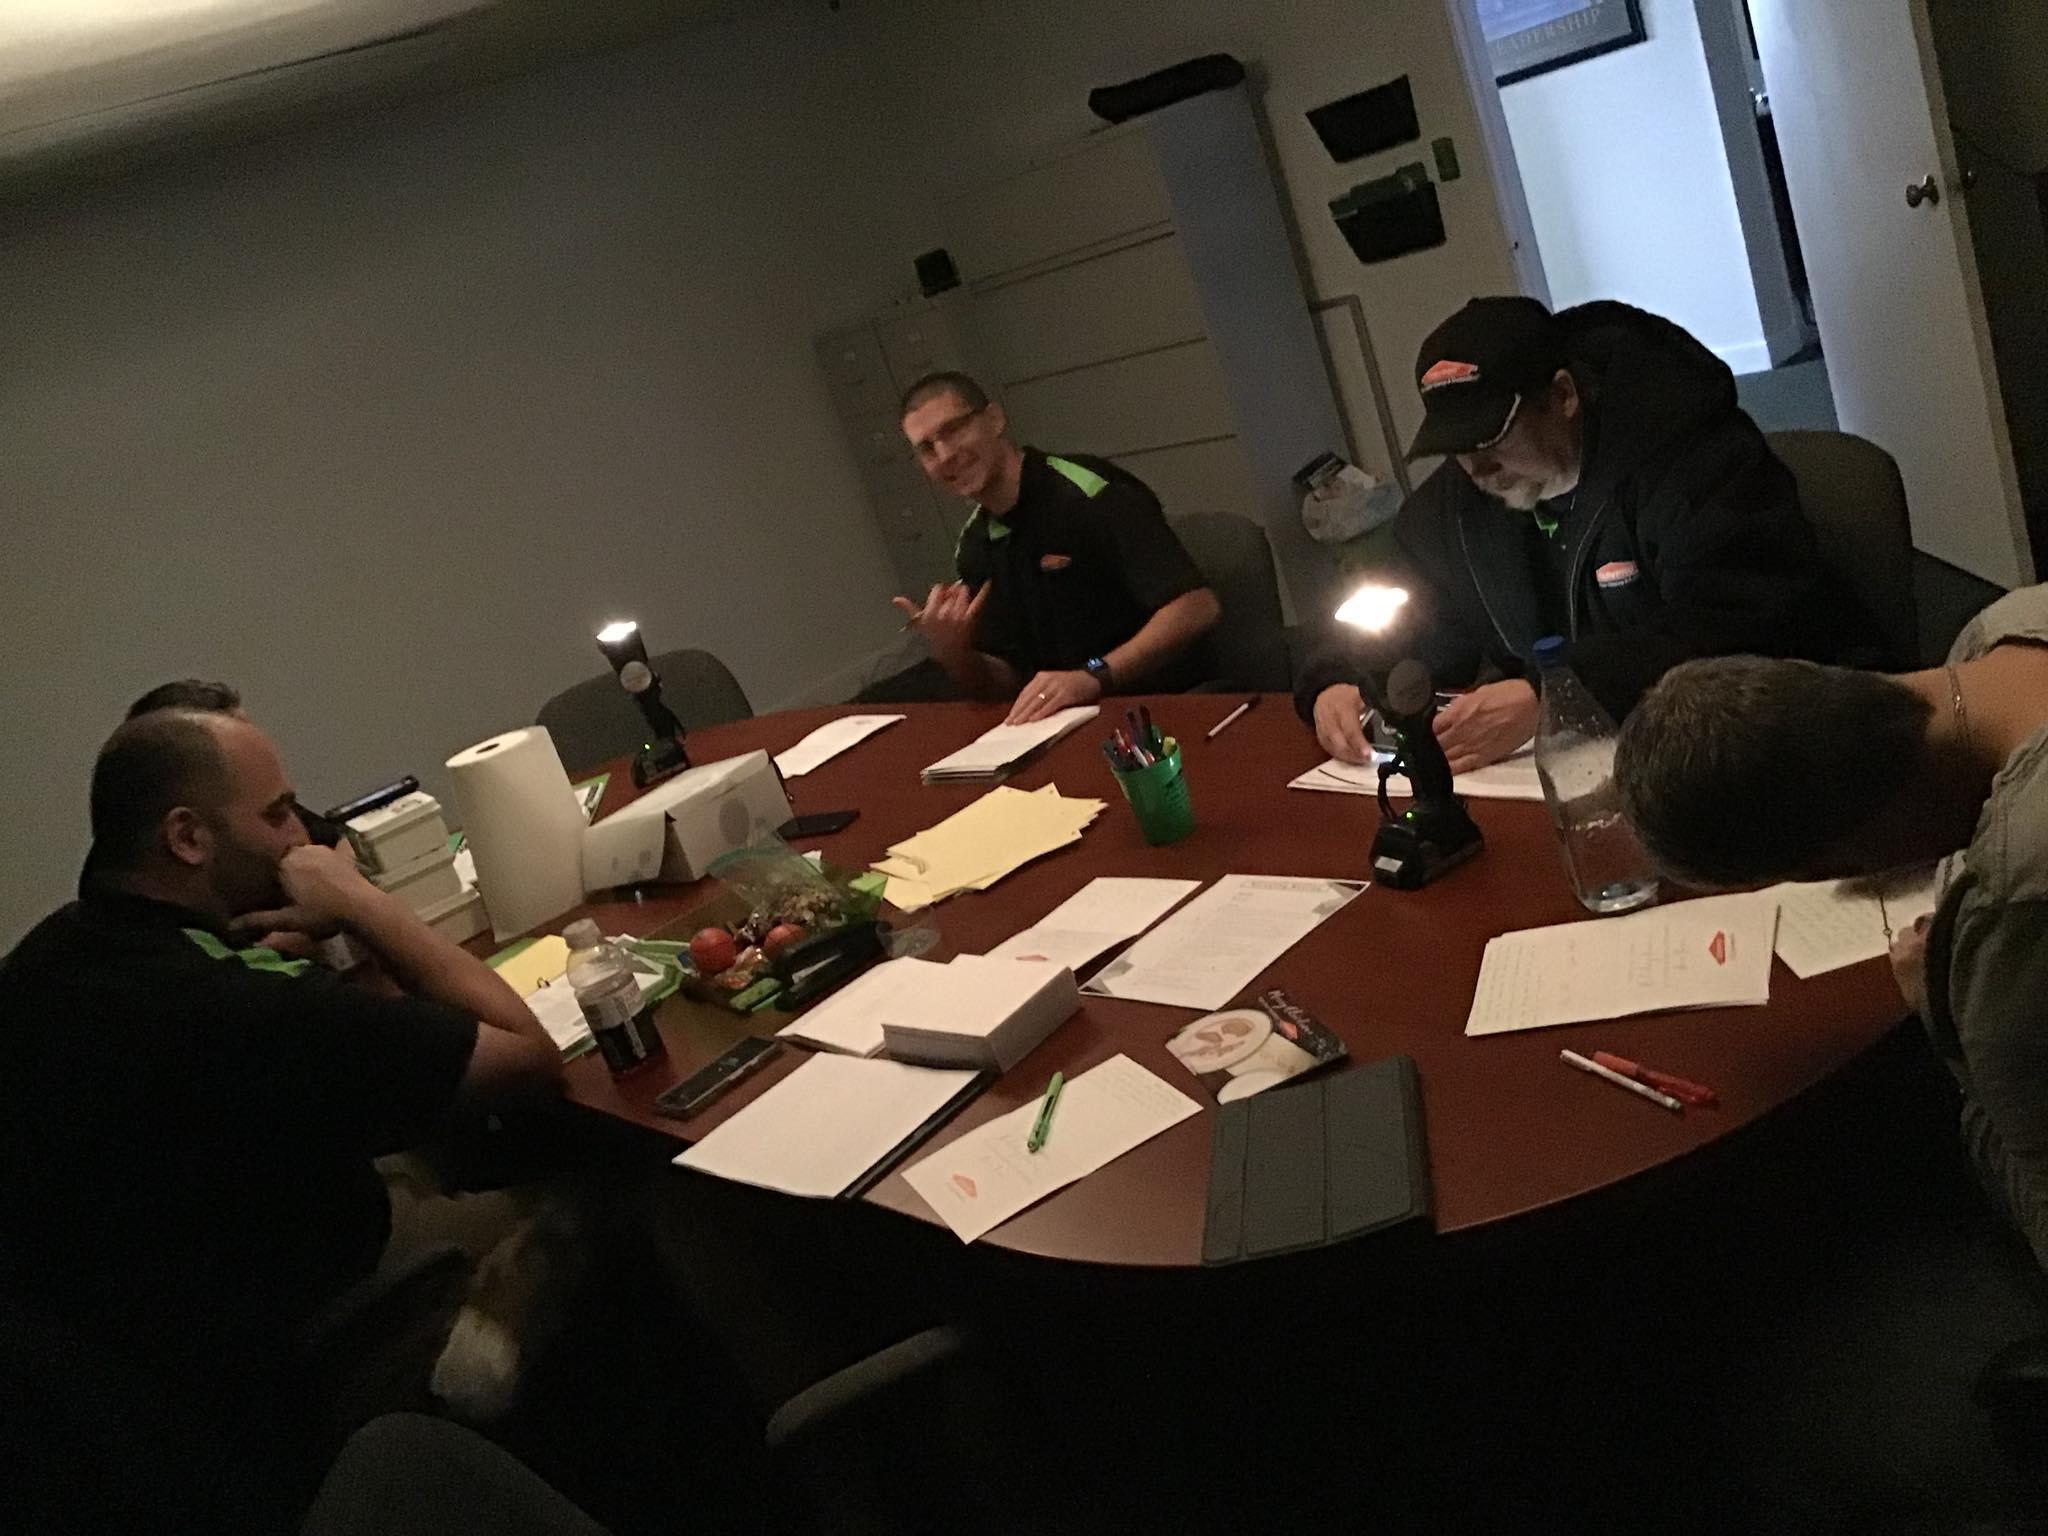 Our SERVPRO of Charlottesville storm team working through a power outage to help customers with their storm and water damage cleanup and restoration.